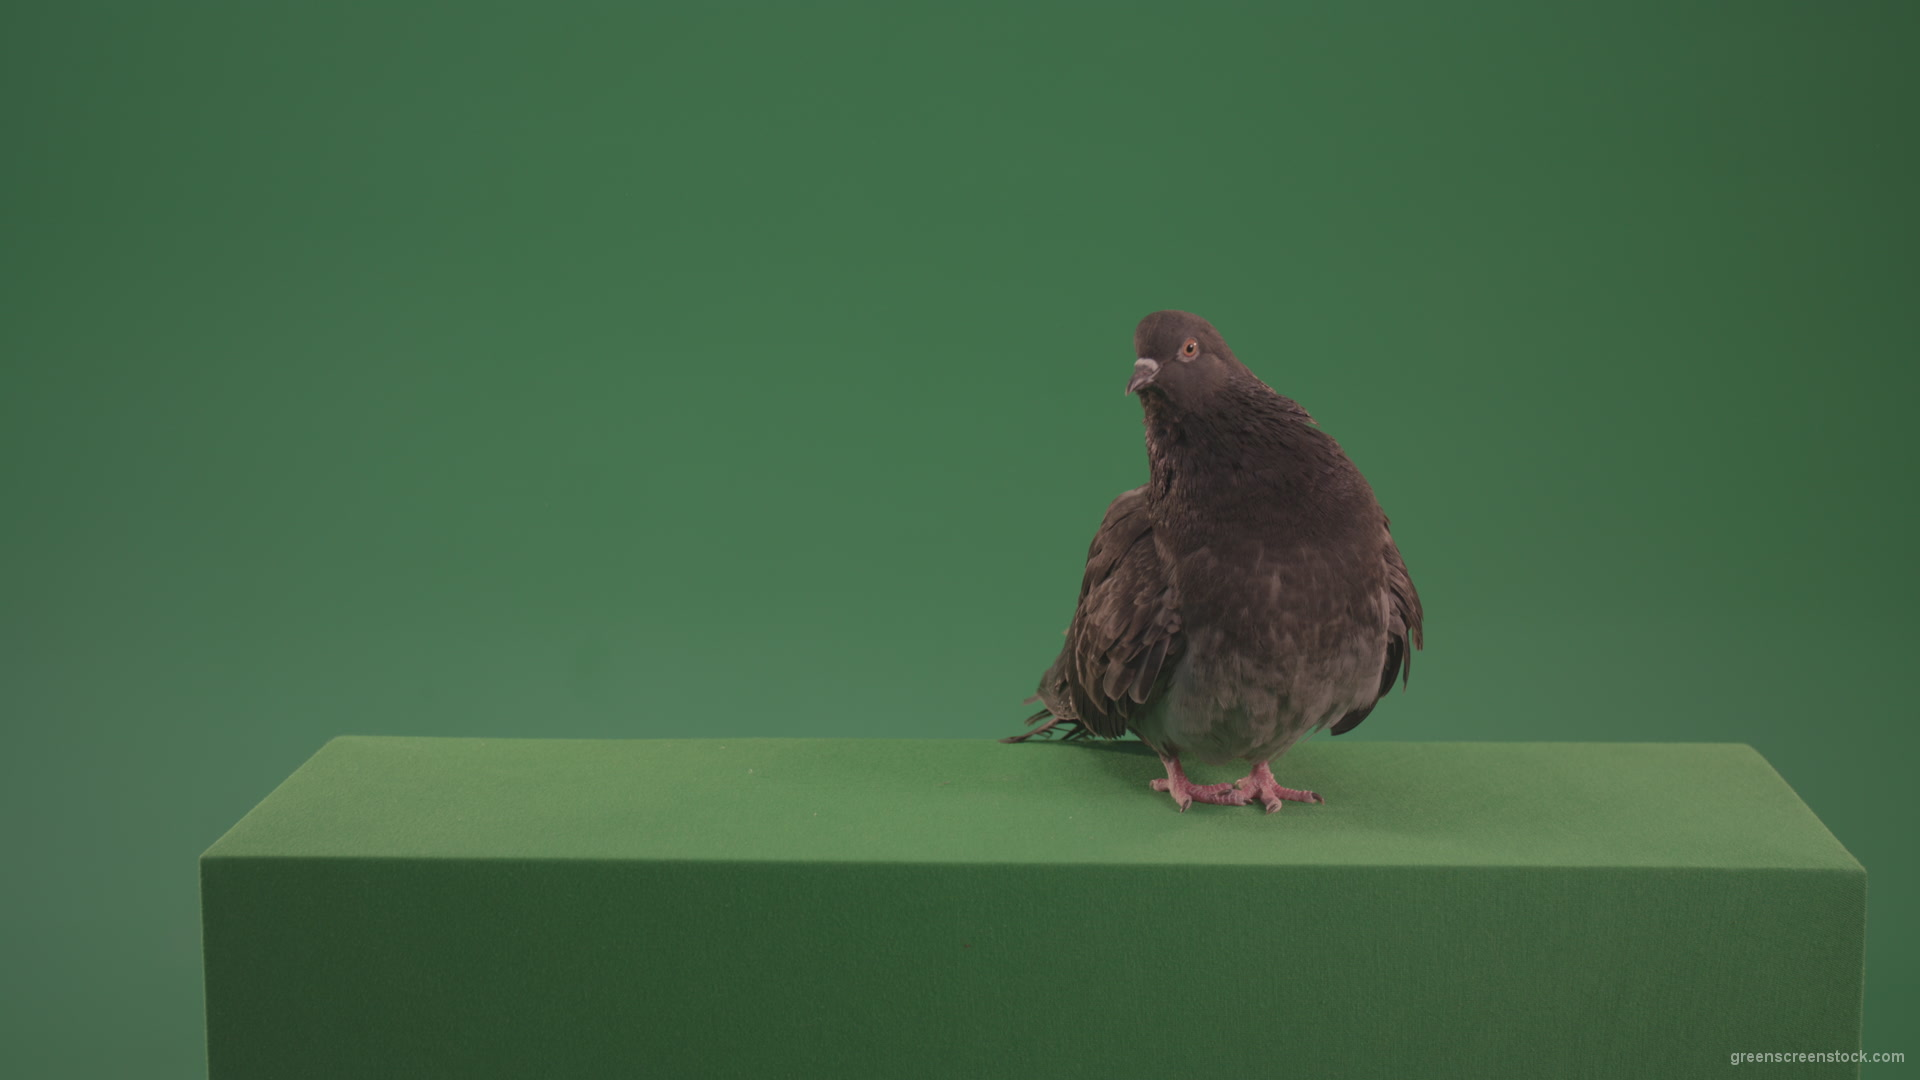 Bird-landed-and-inspected-the-territory-isolated-on-chromakey-background_008 Green Screen Stock